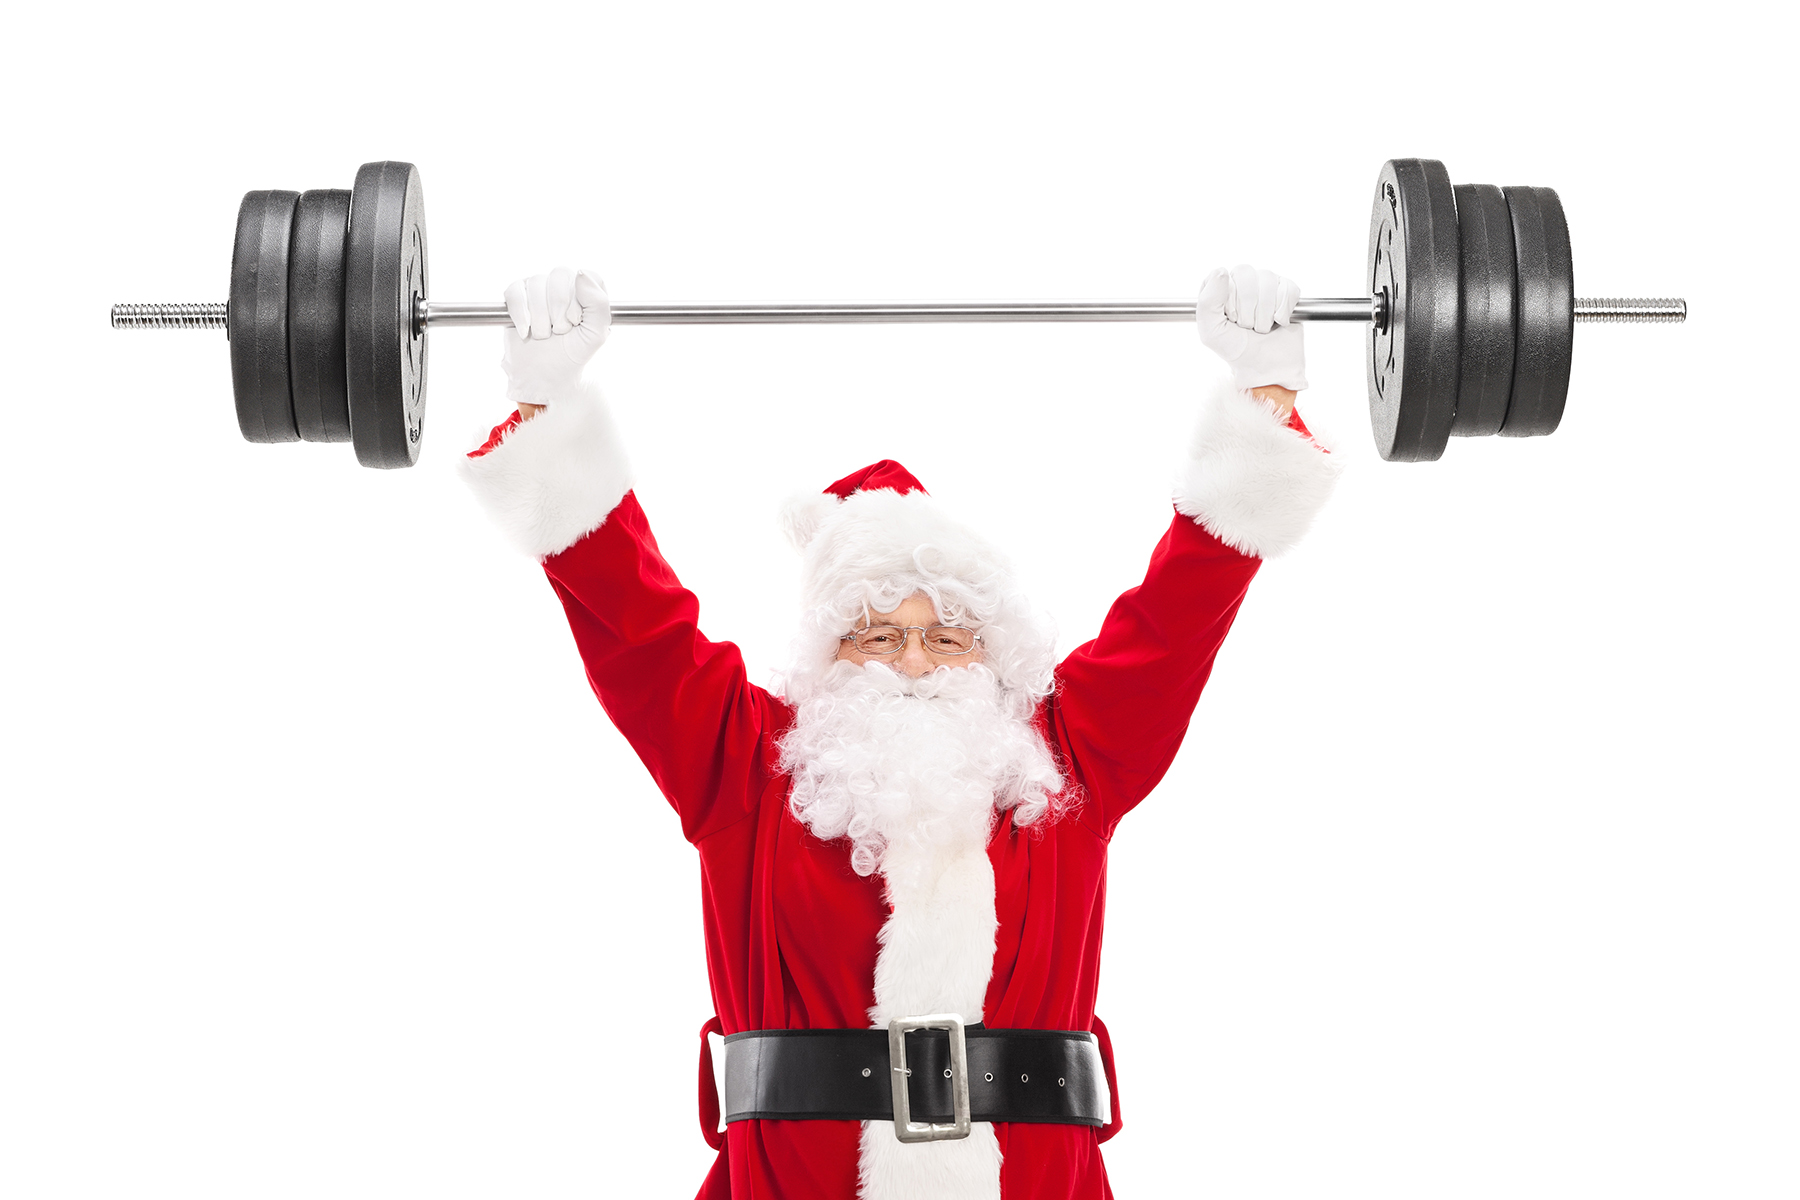 Christmas gift guide: Health and fitness